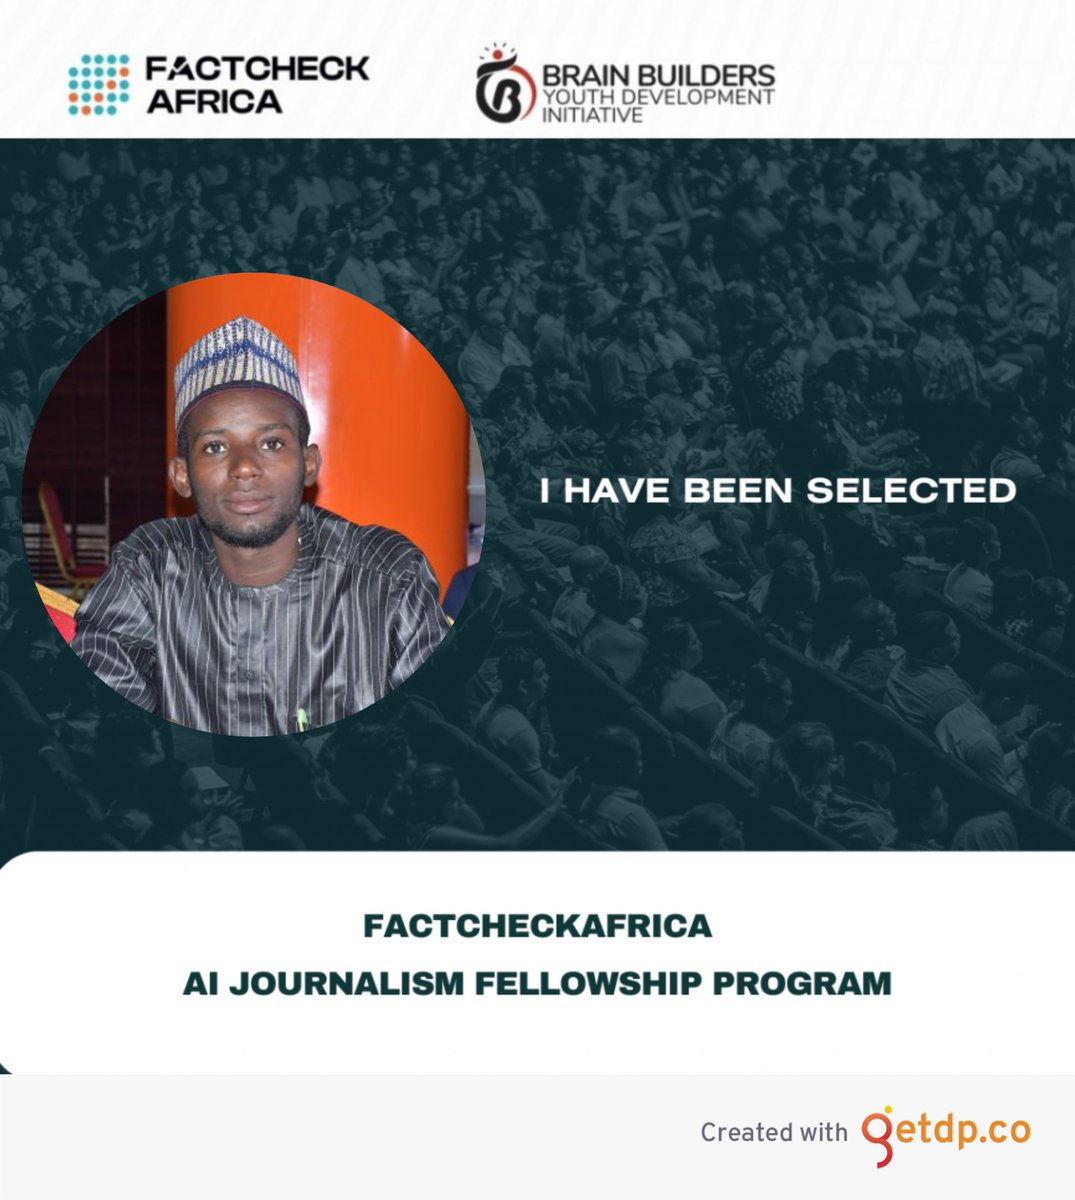 I'm thrilled to announce that I've been accepted into the FactCheckAfrica AI Journalism Fellowship Program!
Excited to explore the world of AI in journalism and make a positive impact. #AIJournalismFellowship  #JournalismAI #MediaInnovation #FactCheckAfrica #ExcitedForTheJourney